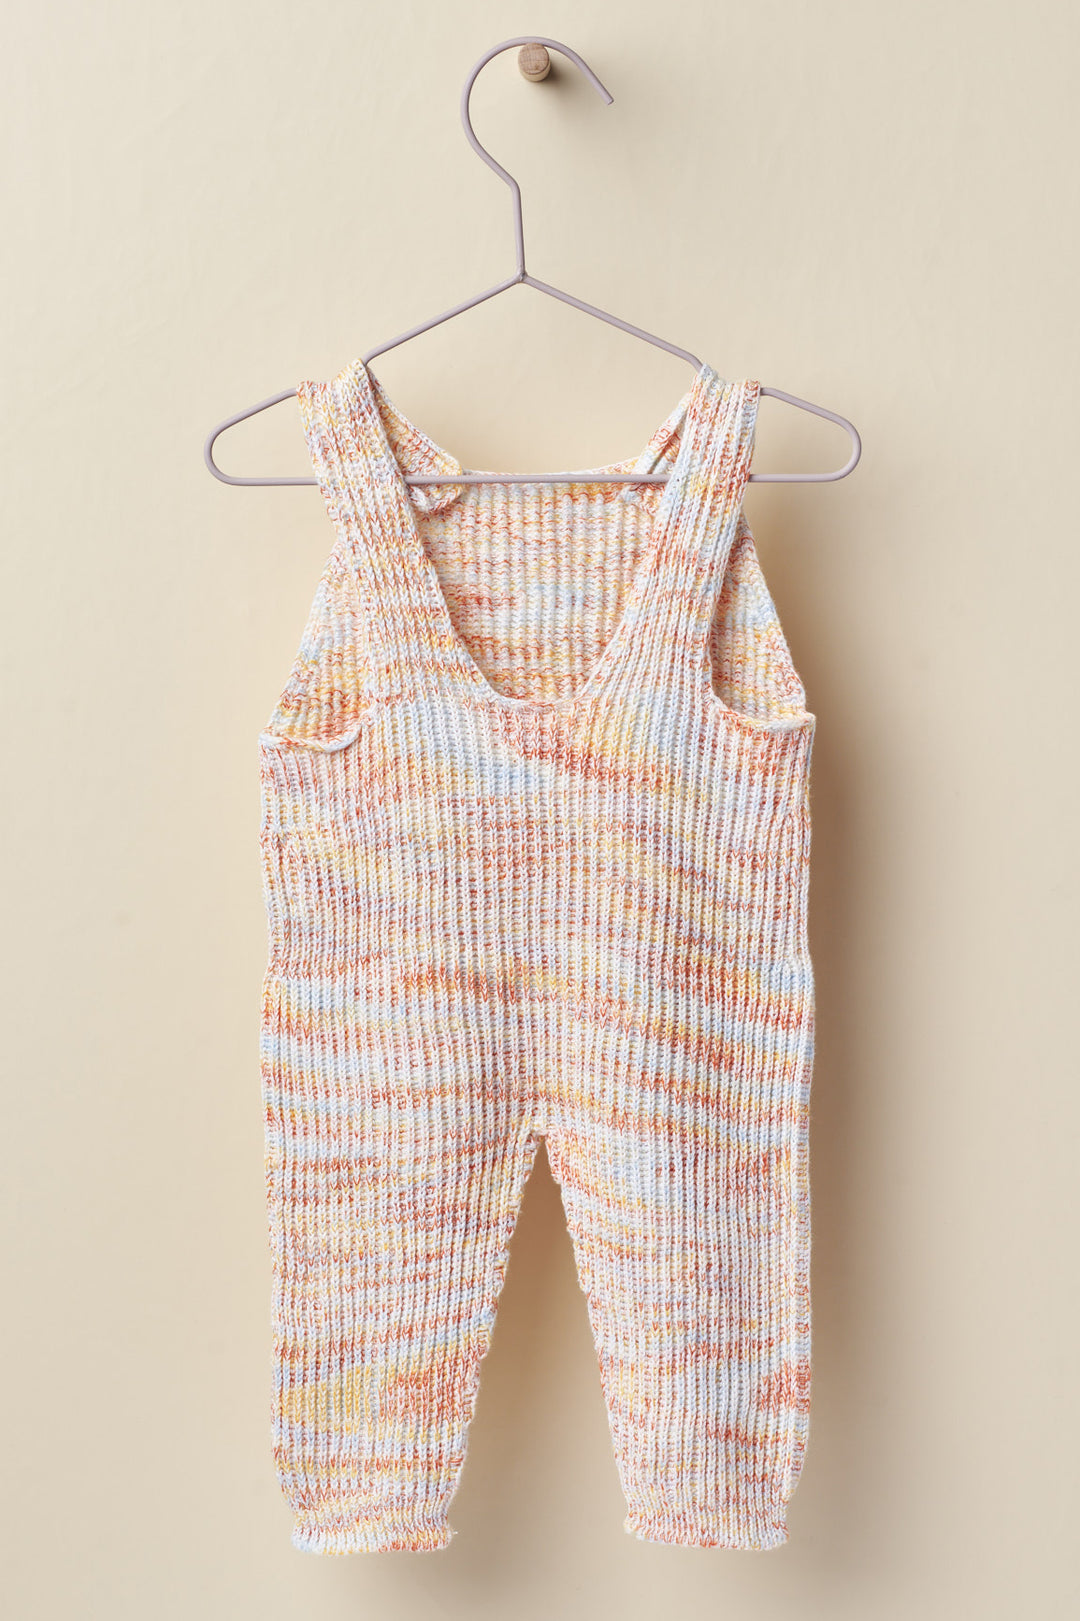 Wedoble "Channing" Multicoloured Knitted Dungarees | Millie and John